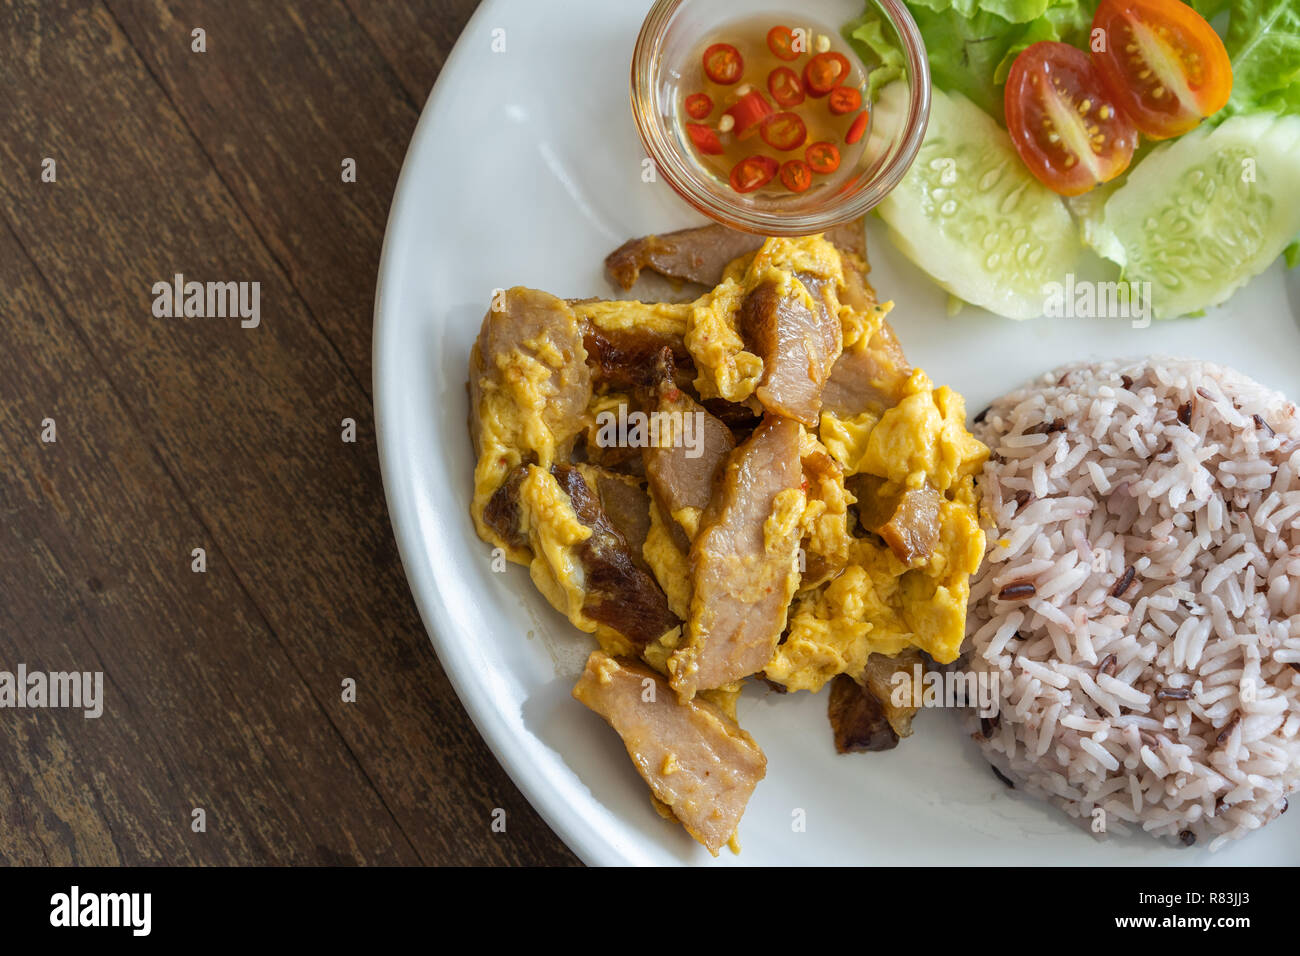 fried pork with egg and rice on plate Stock Photo